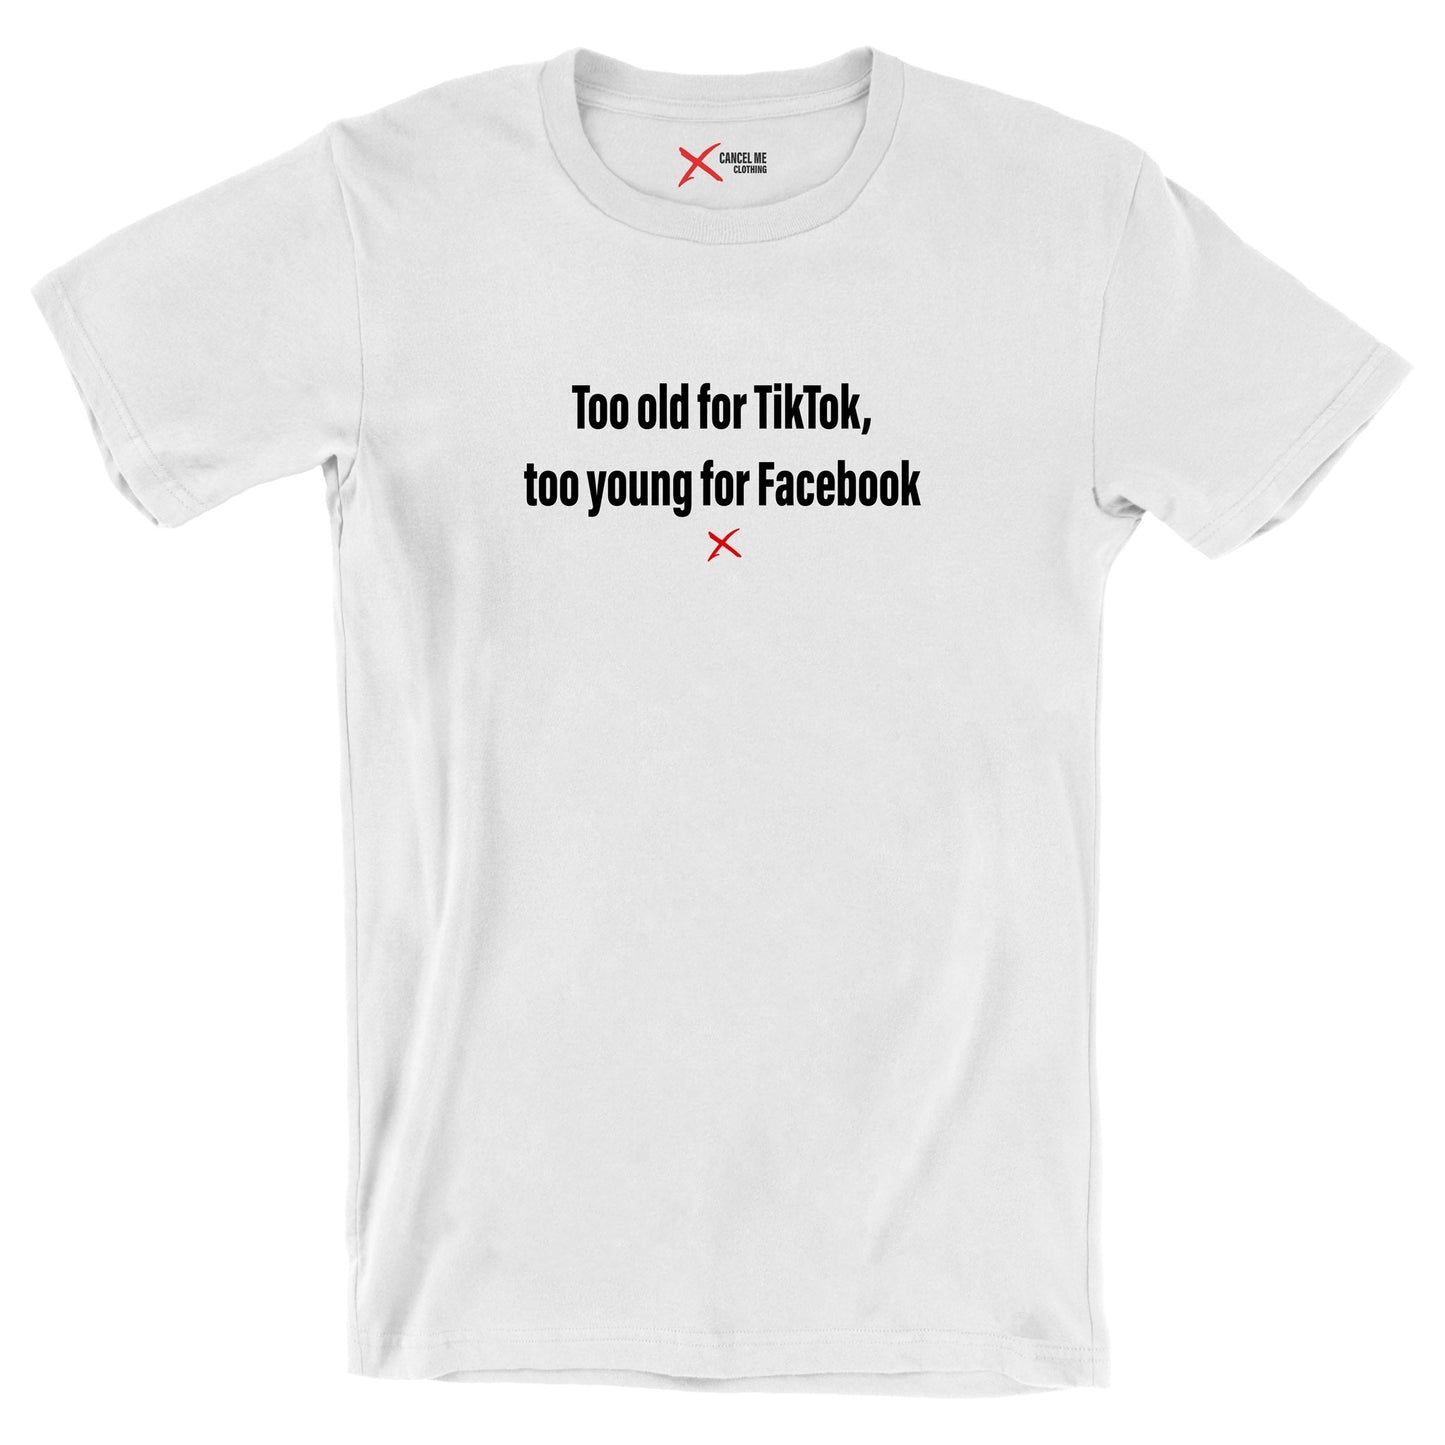 Too old for TikTok, too young for Facebook - Shirt